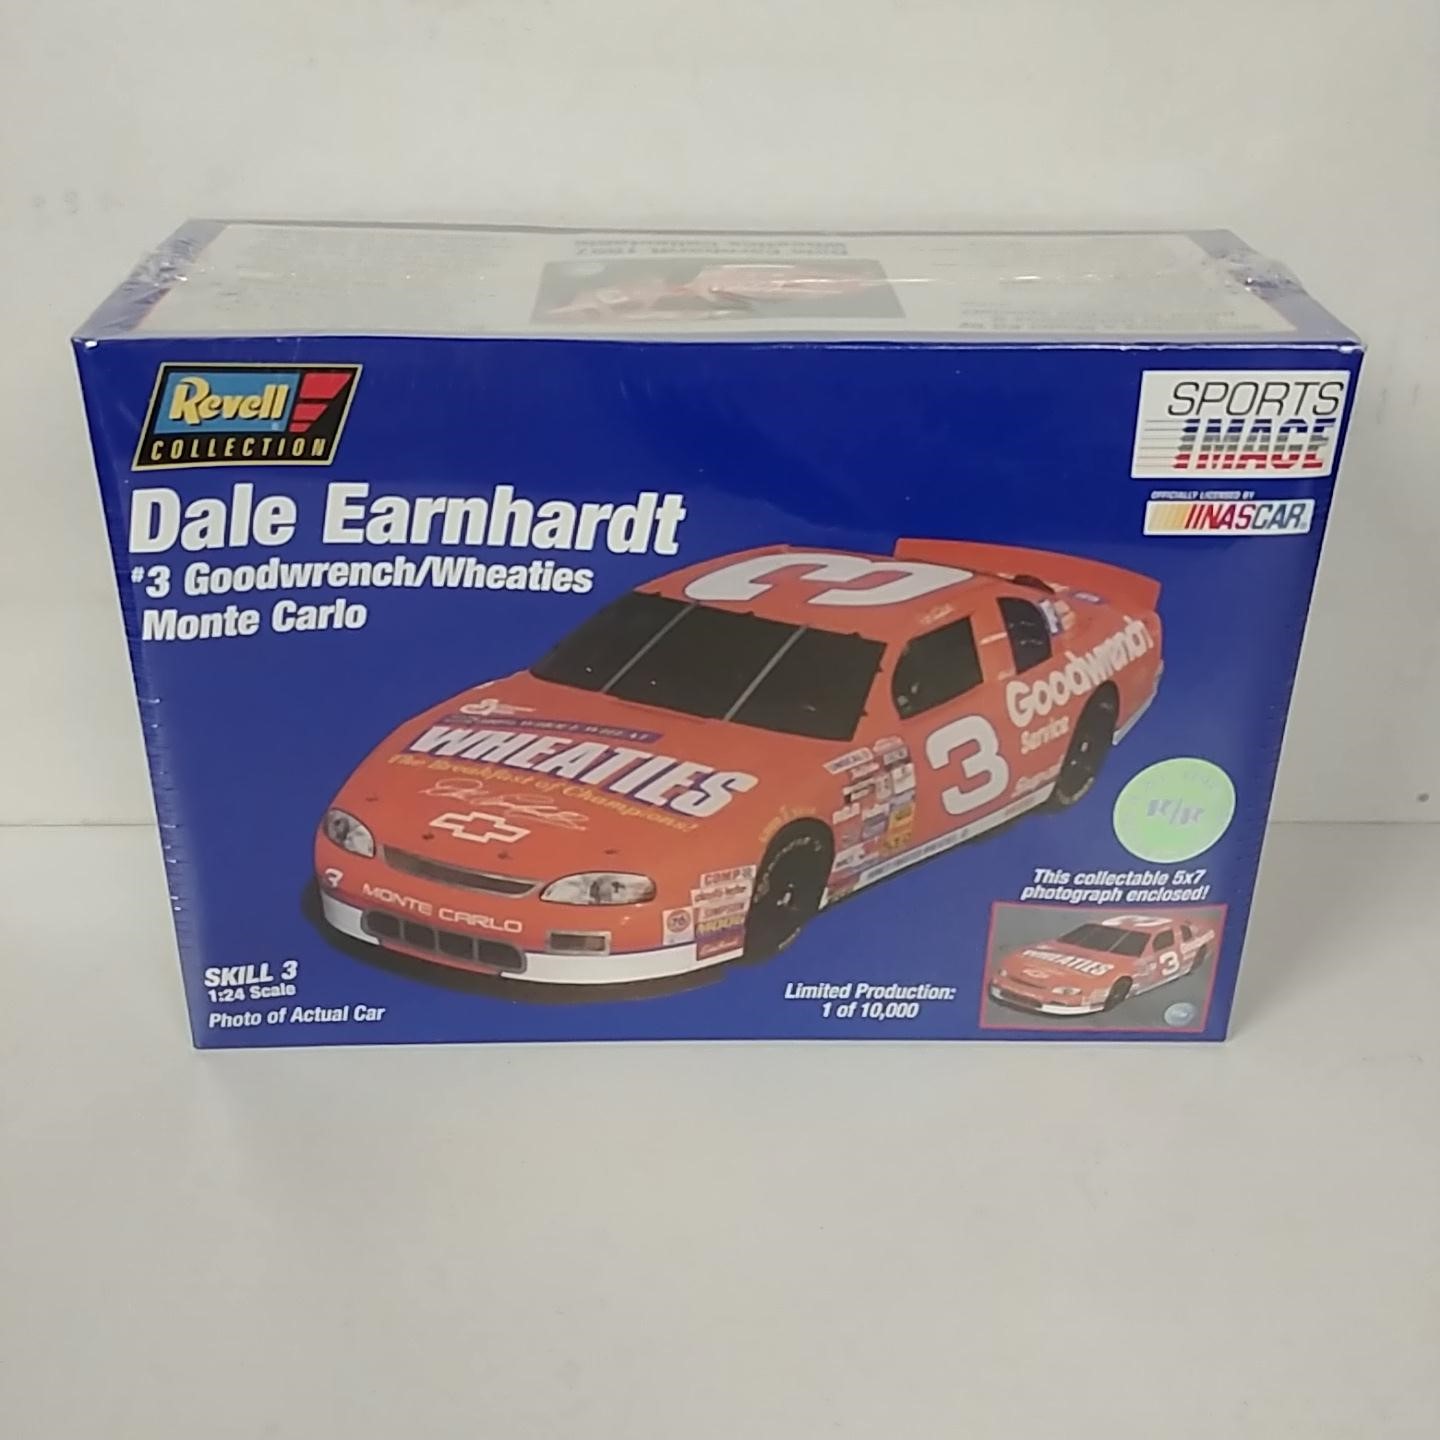 1997 Dale Earnhardt 1/24th GM Goodwrench "Wheaties" Monte Carlo model kit by Revell